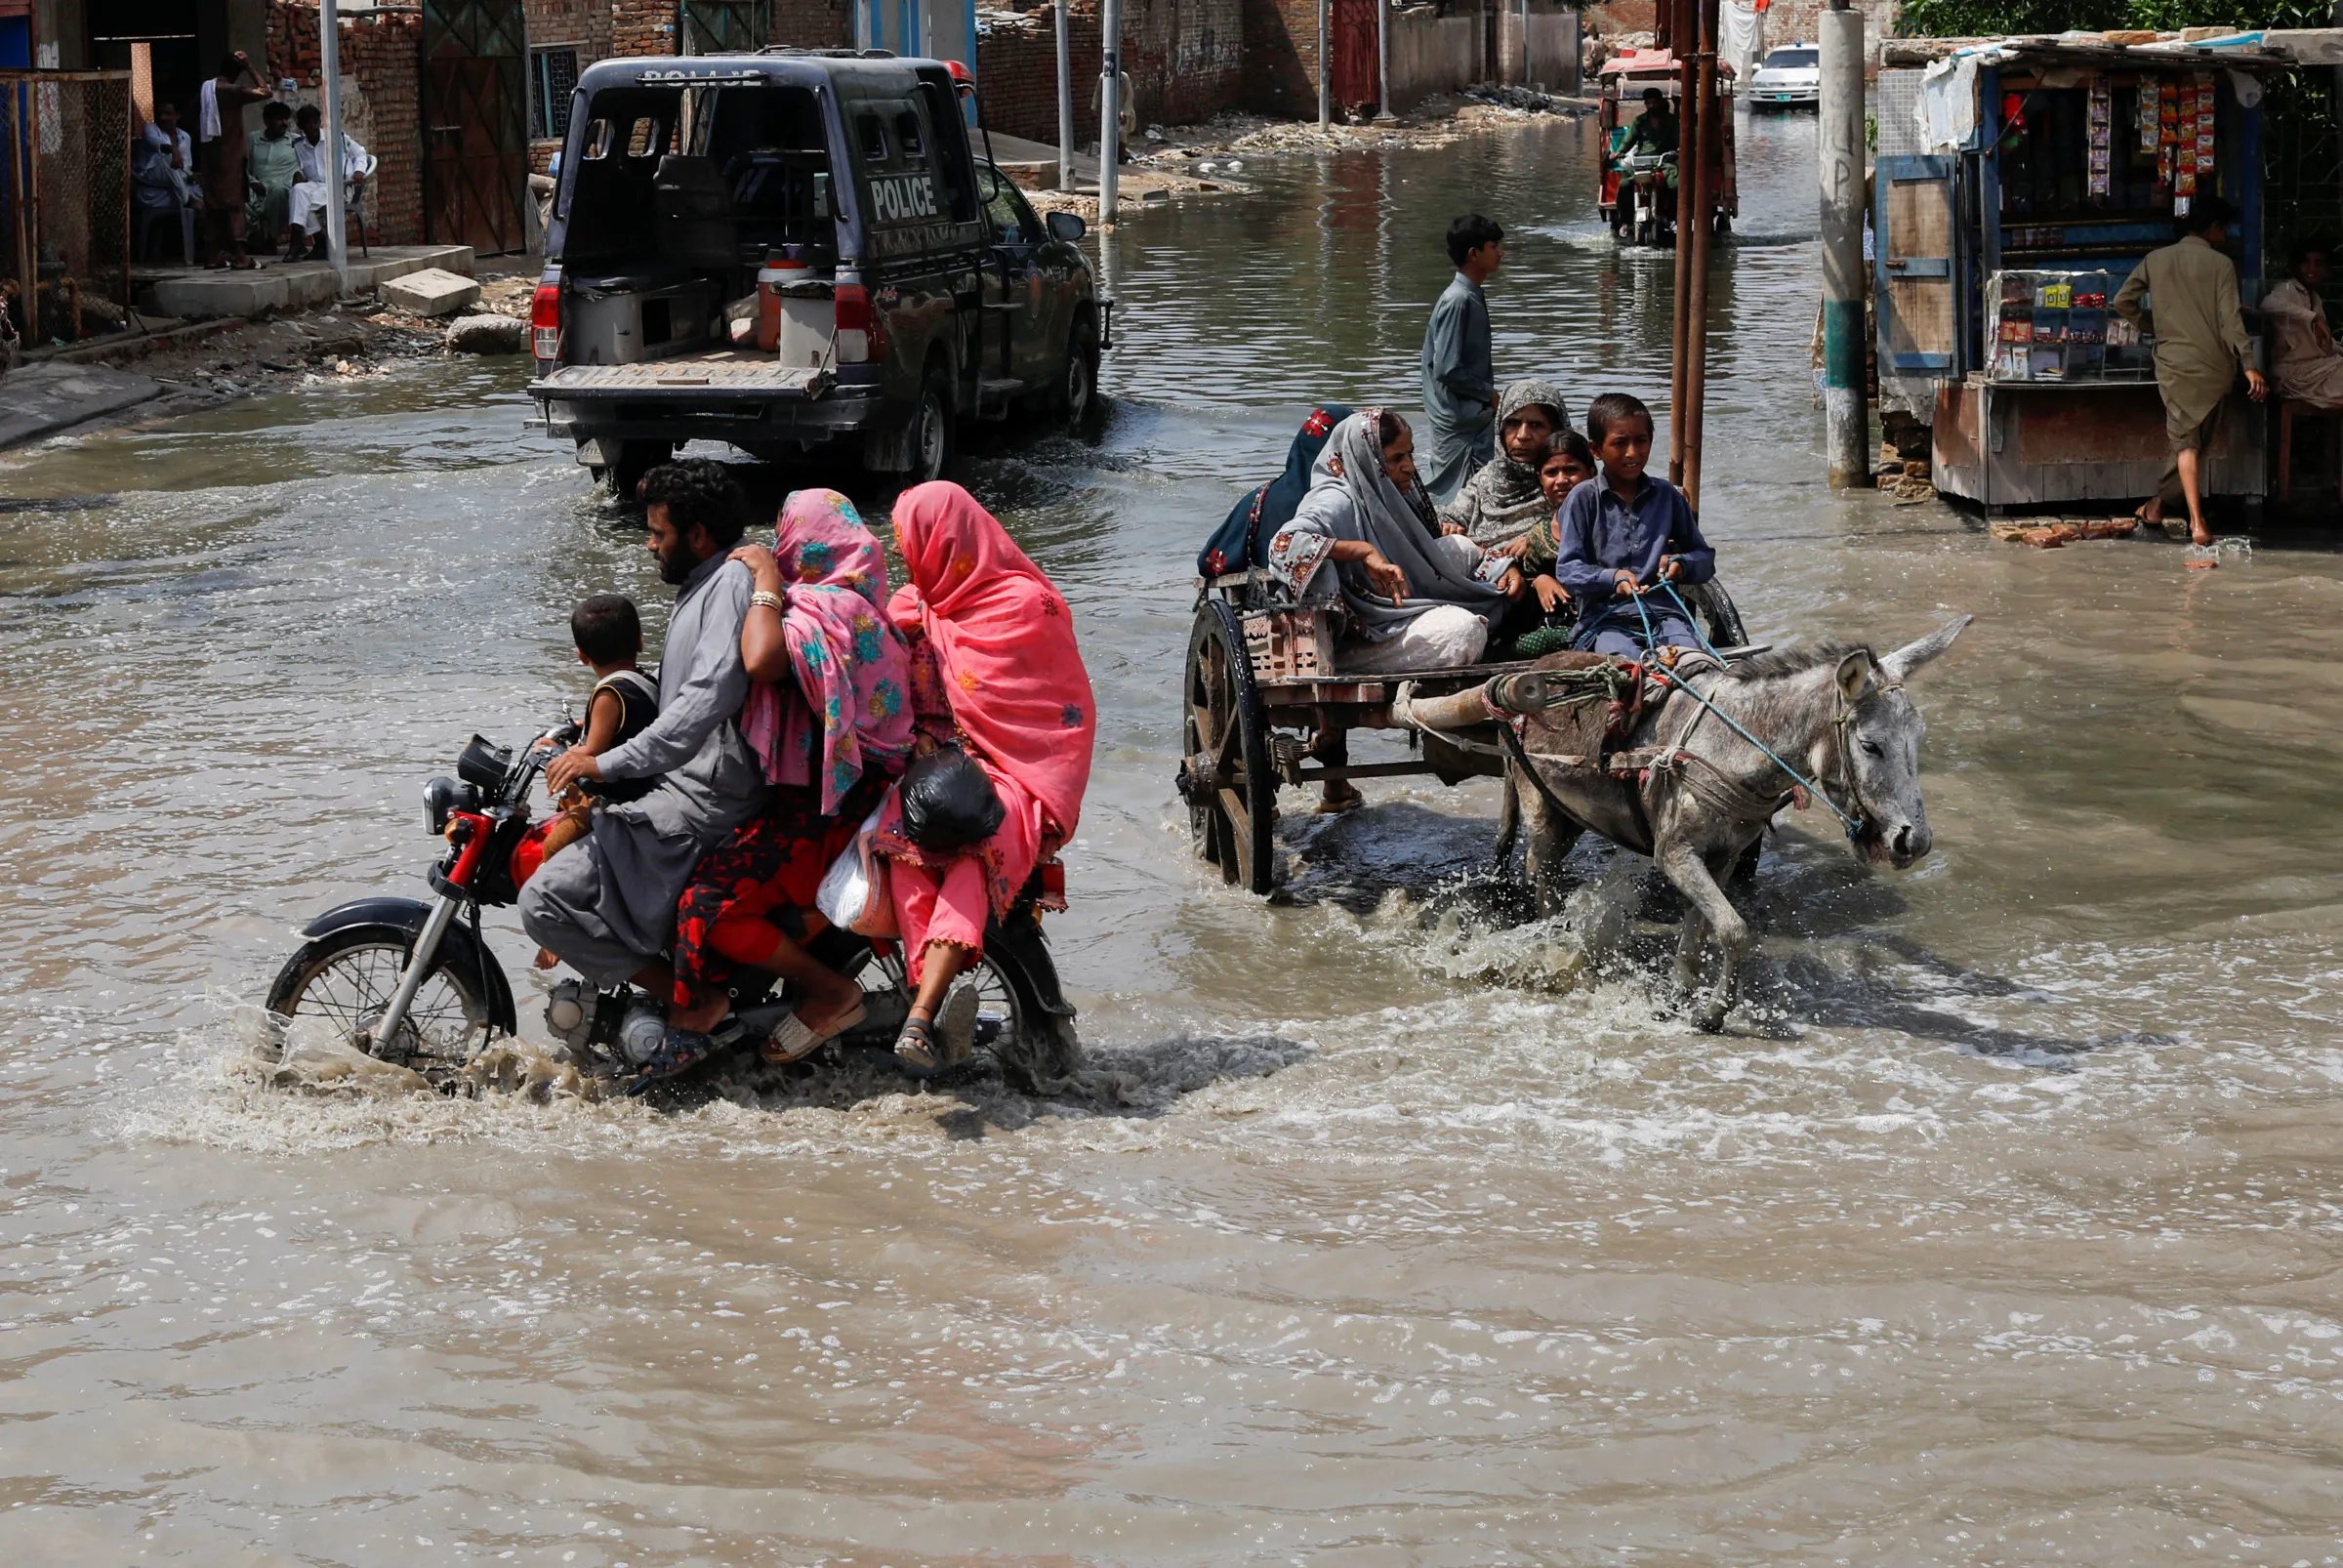 A family sit on a motorbike driving through floods next to a donkey pulling a cart with a family in